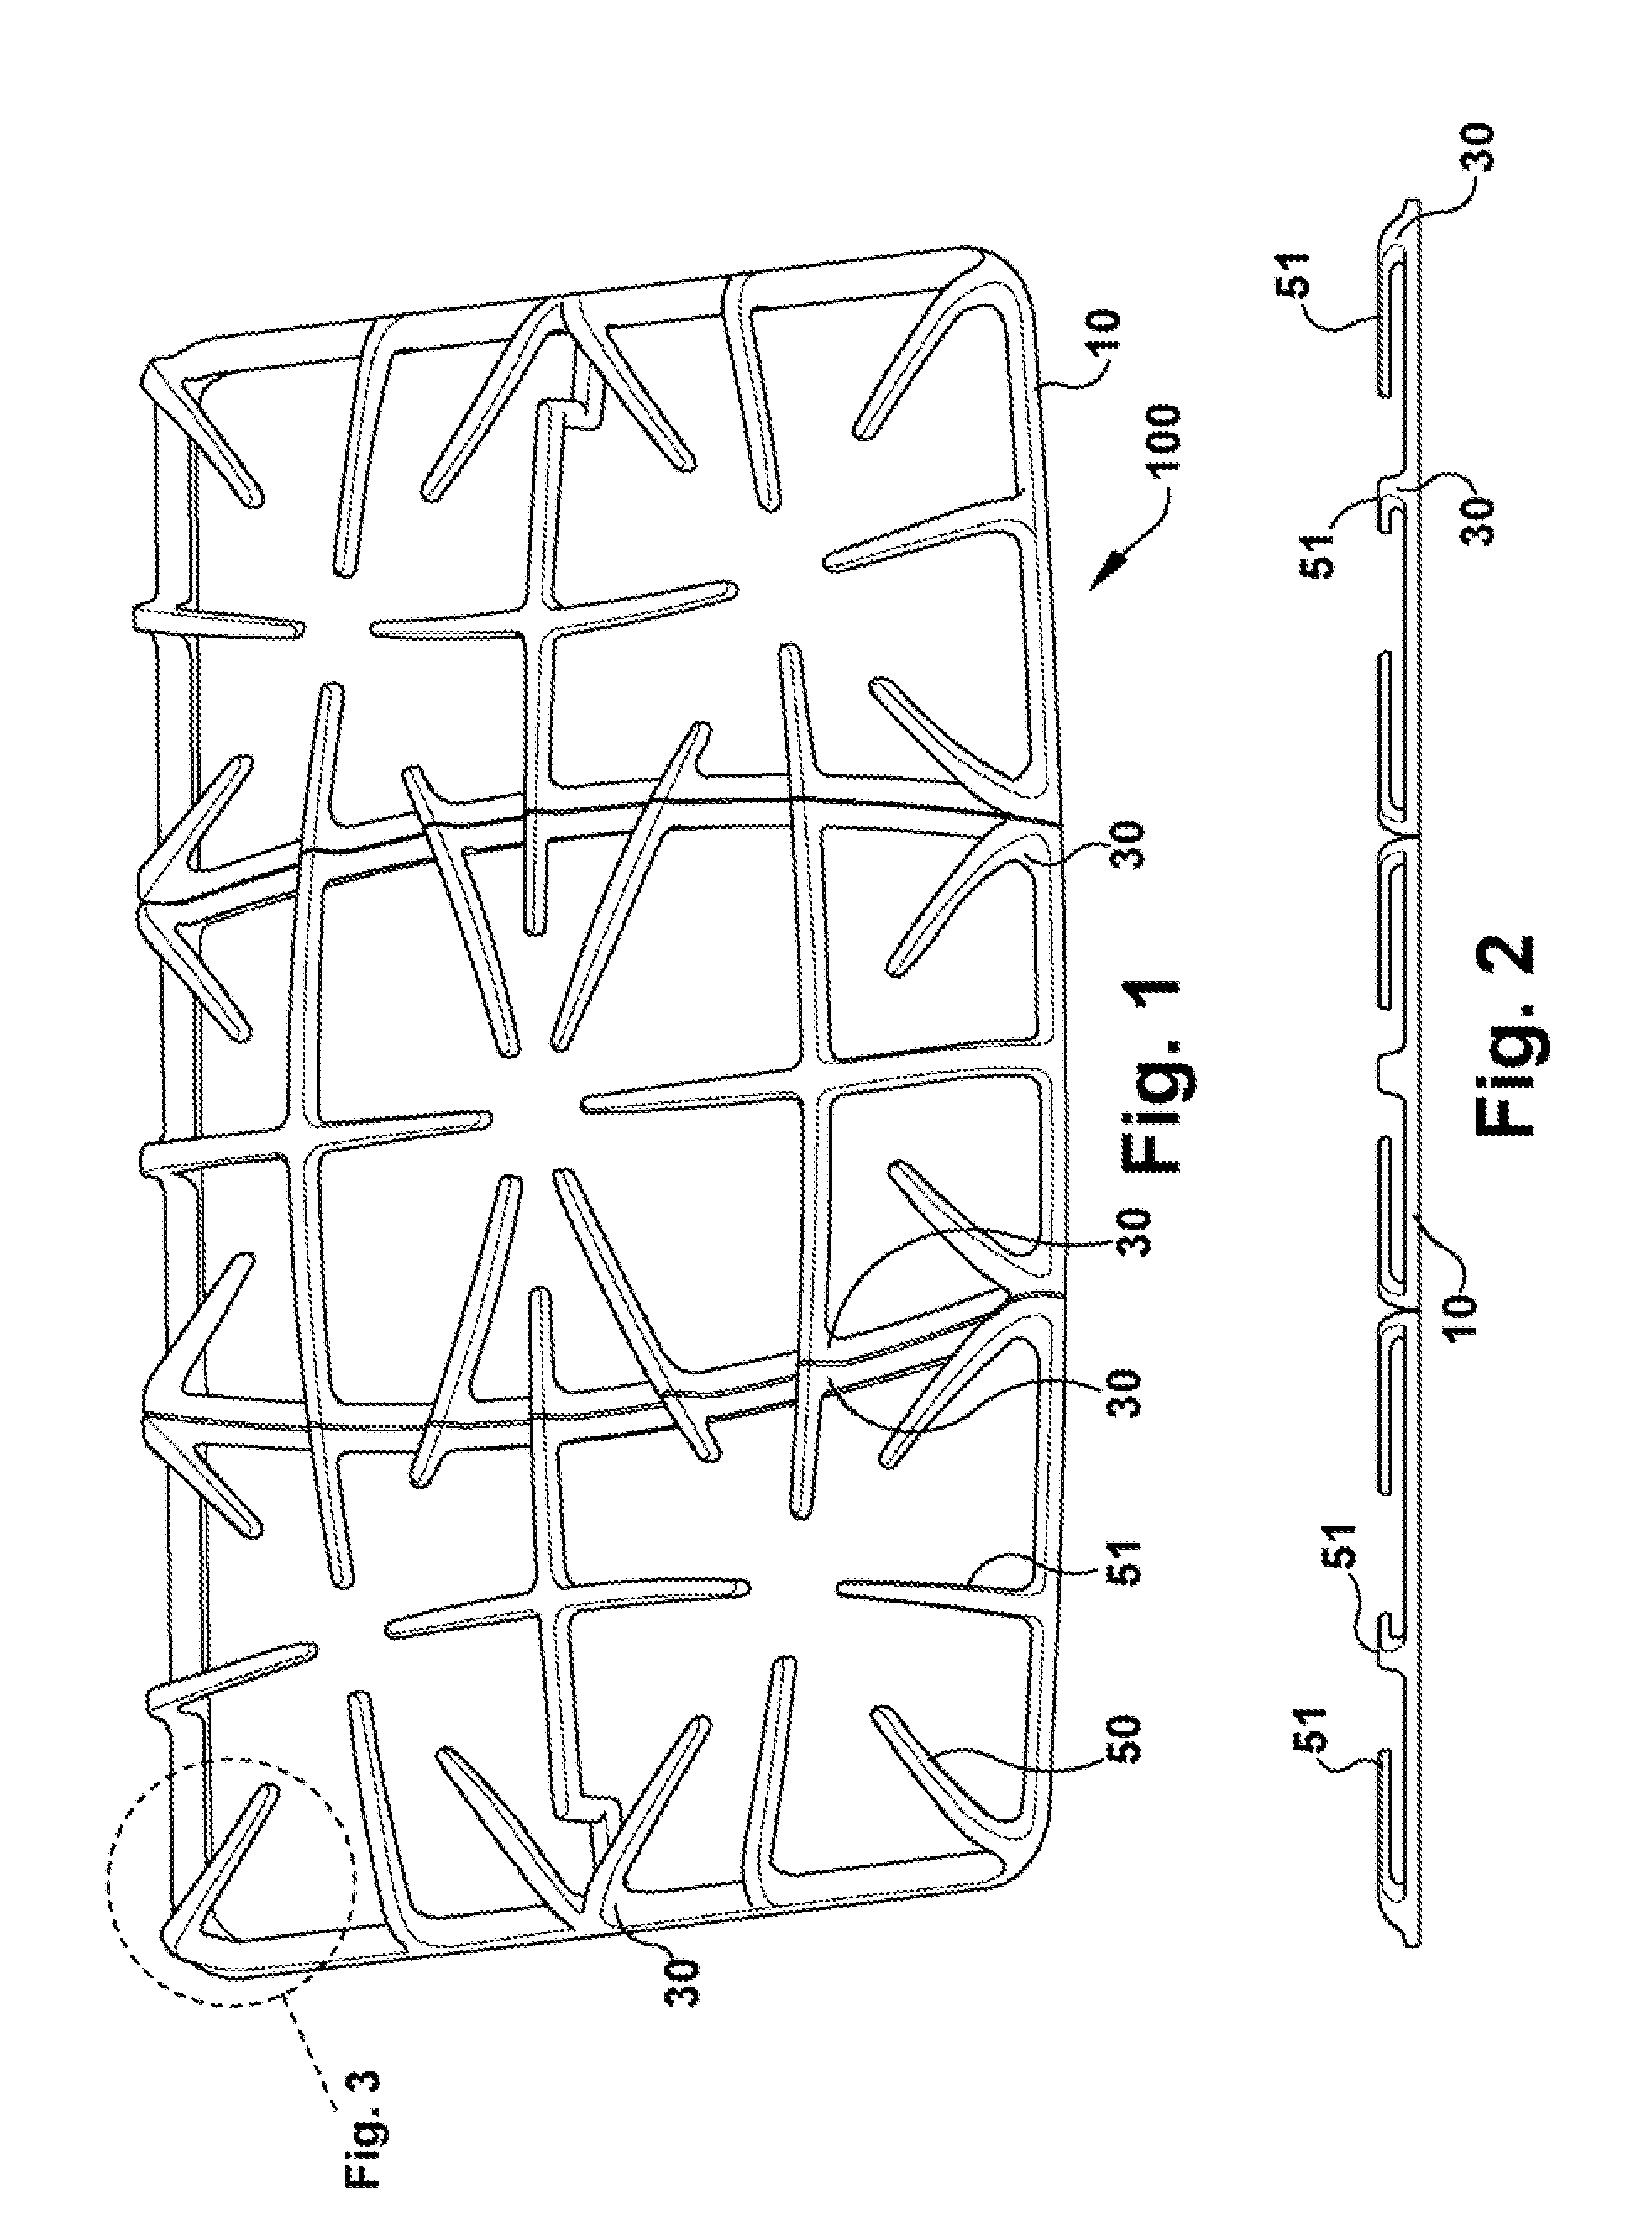 Grate apparatus and method